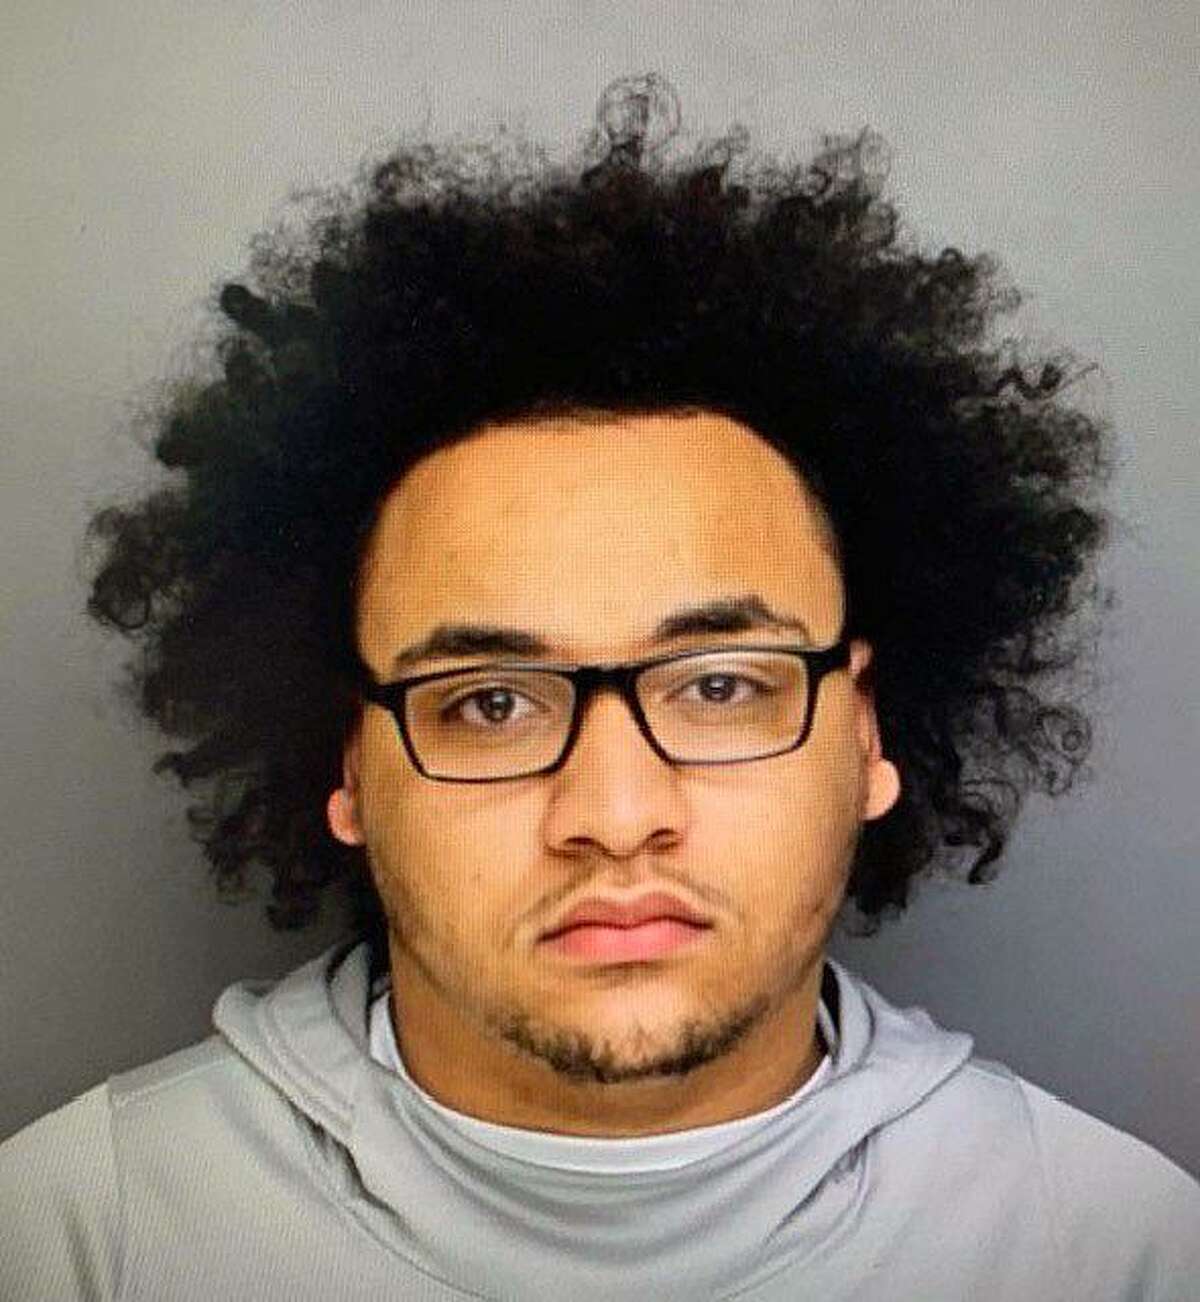 Darrick Tunstall, 19, of Horace Street in Bridgeport, Conn., was charged with felony murder, conspiracy to commit first-degree robbery and first-degree robbery.